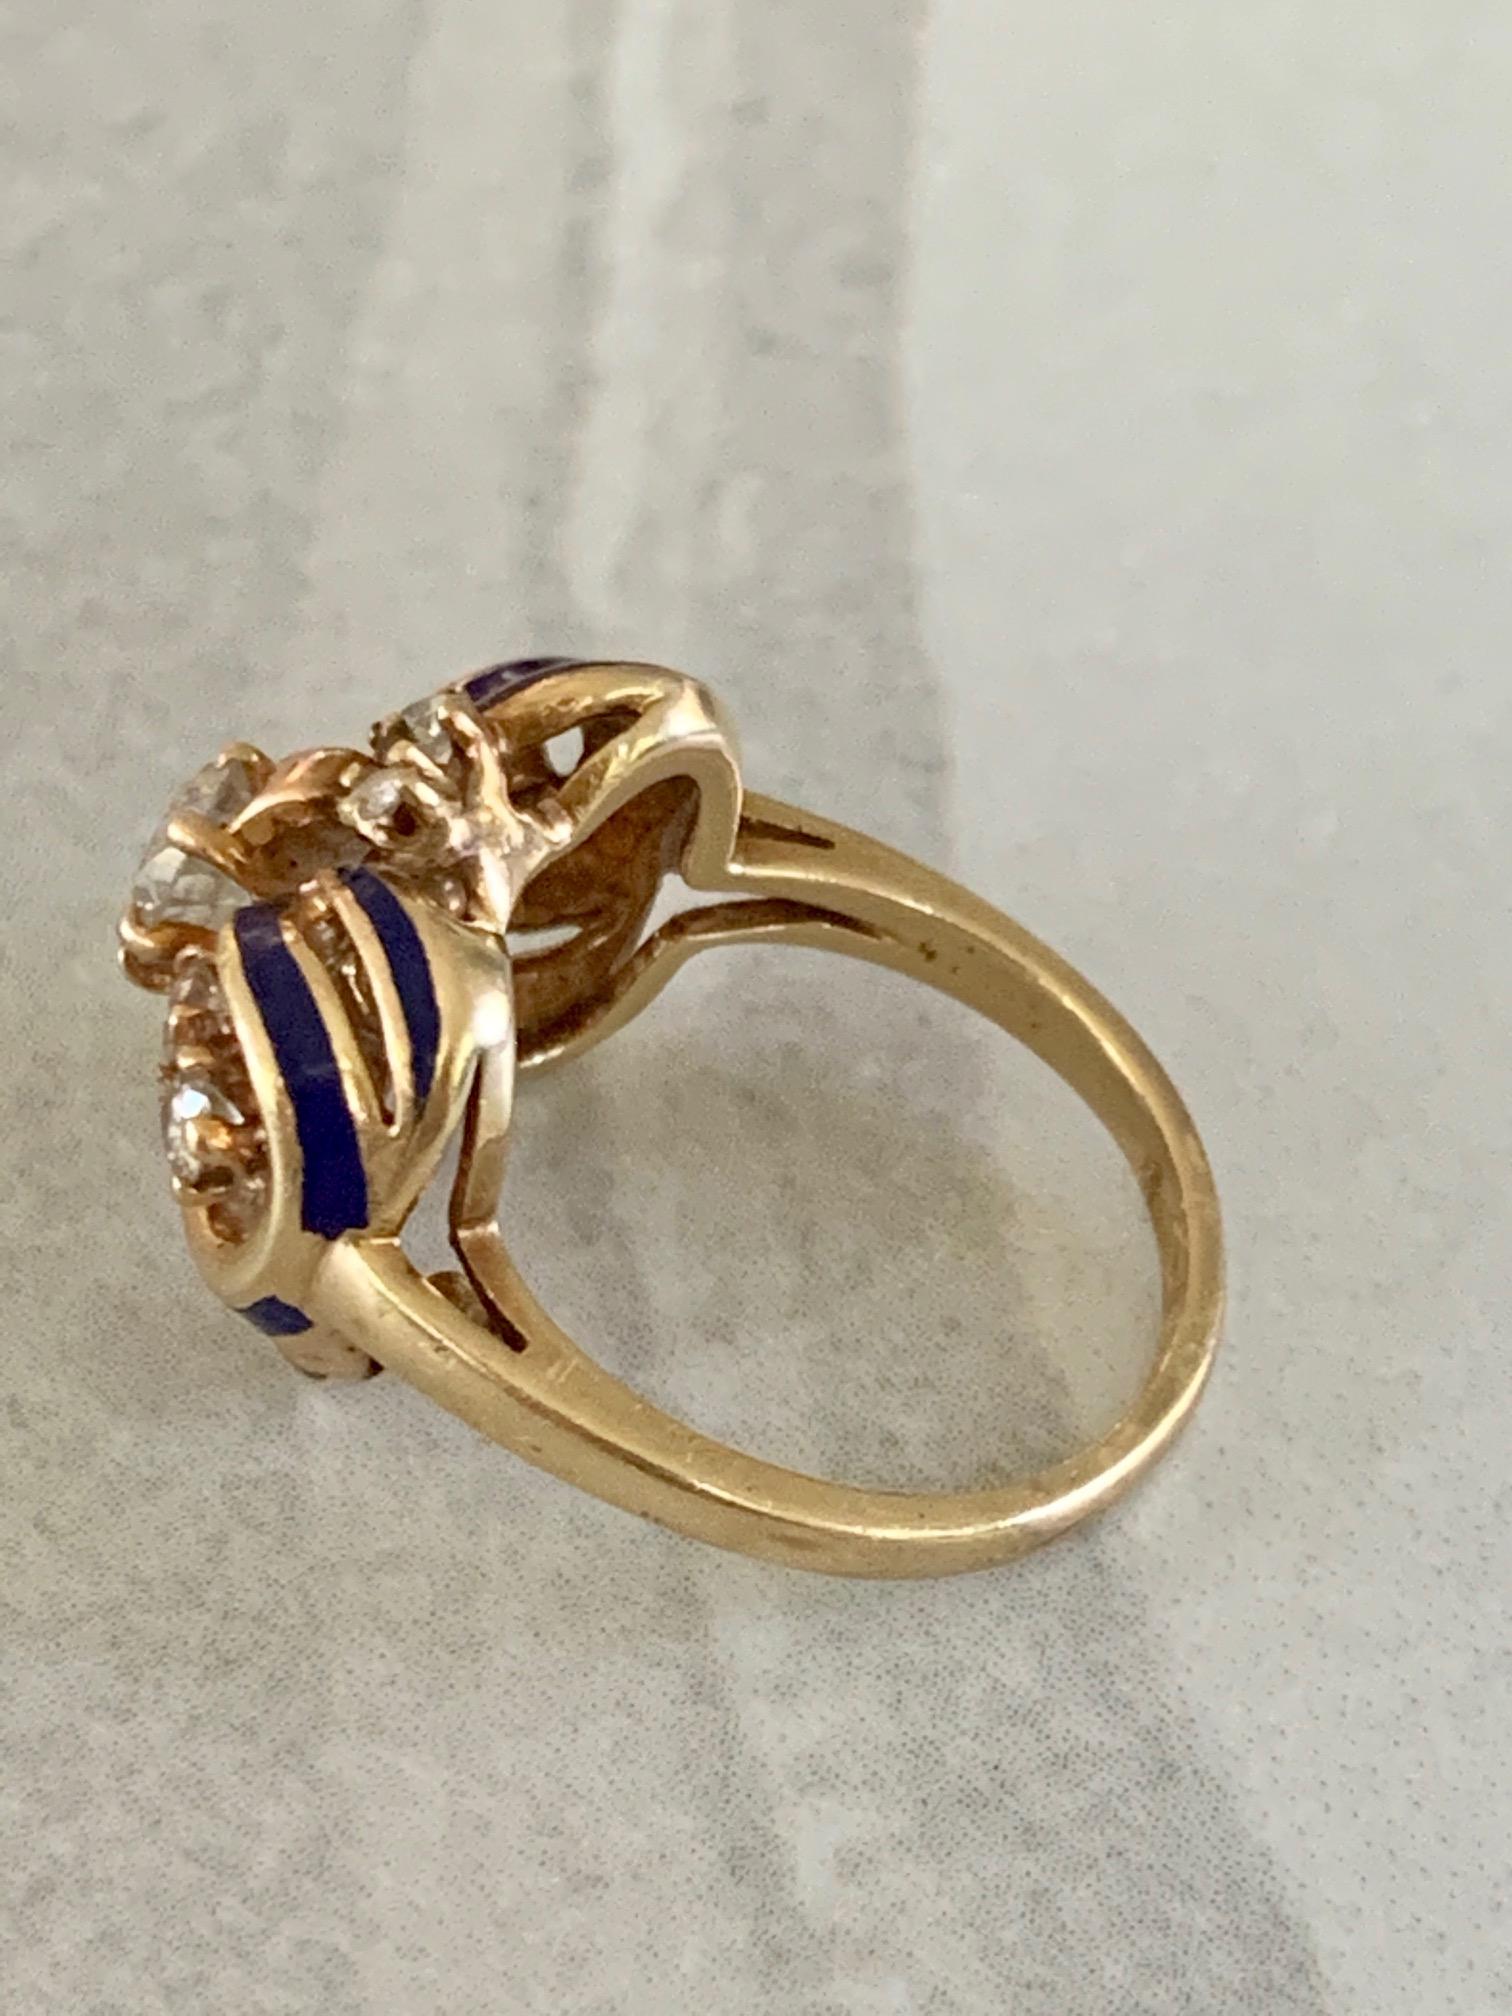 Vintage Brilliant Cut Diamond and Blue Enamel 14 Karat Yellow Gold Ring In Good Condition For Sale In St. Louis Park, MN